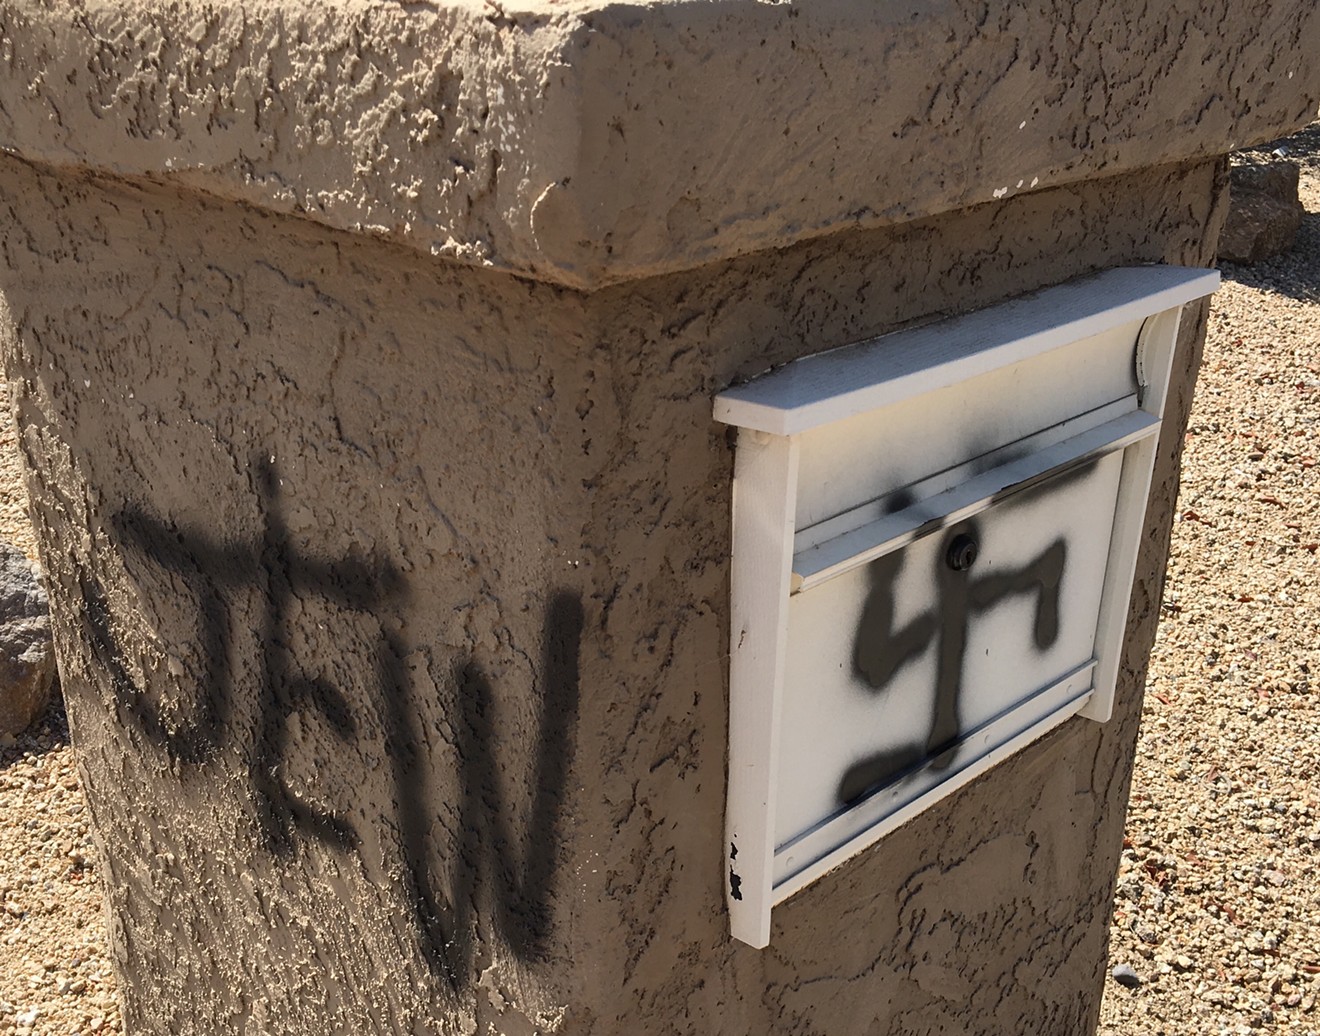 Anti-Semitic incidents are on the rise in Arizona, and a Jewish family whose mailbox was defaced over the July 4 holiday is the latest attack.